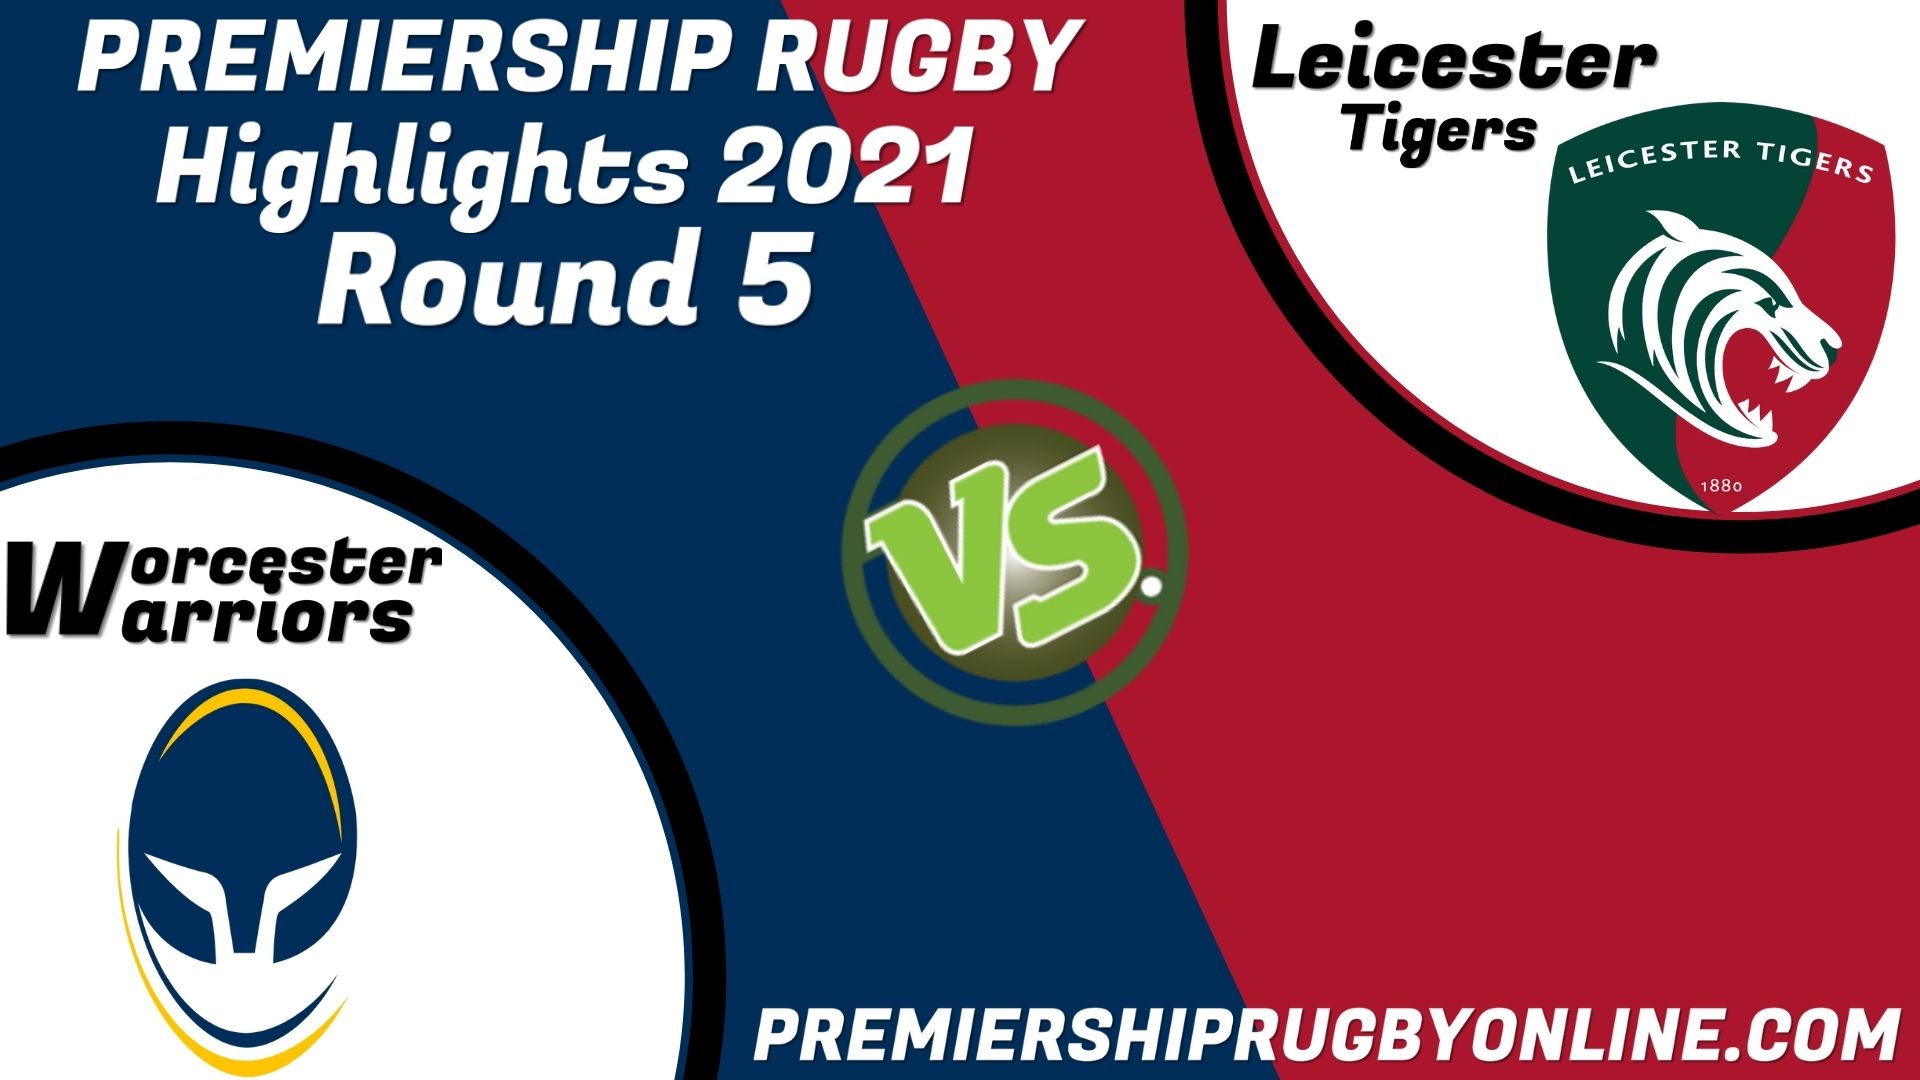 Worcester Warriors Vs Leicester Tigers Highlights 2021 RD 5